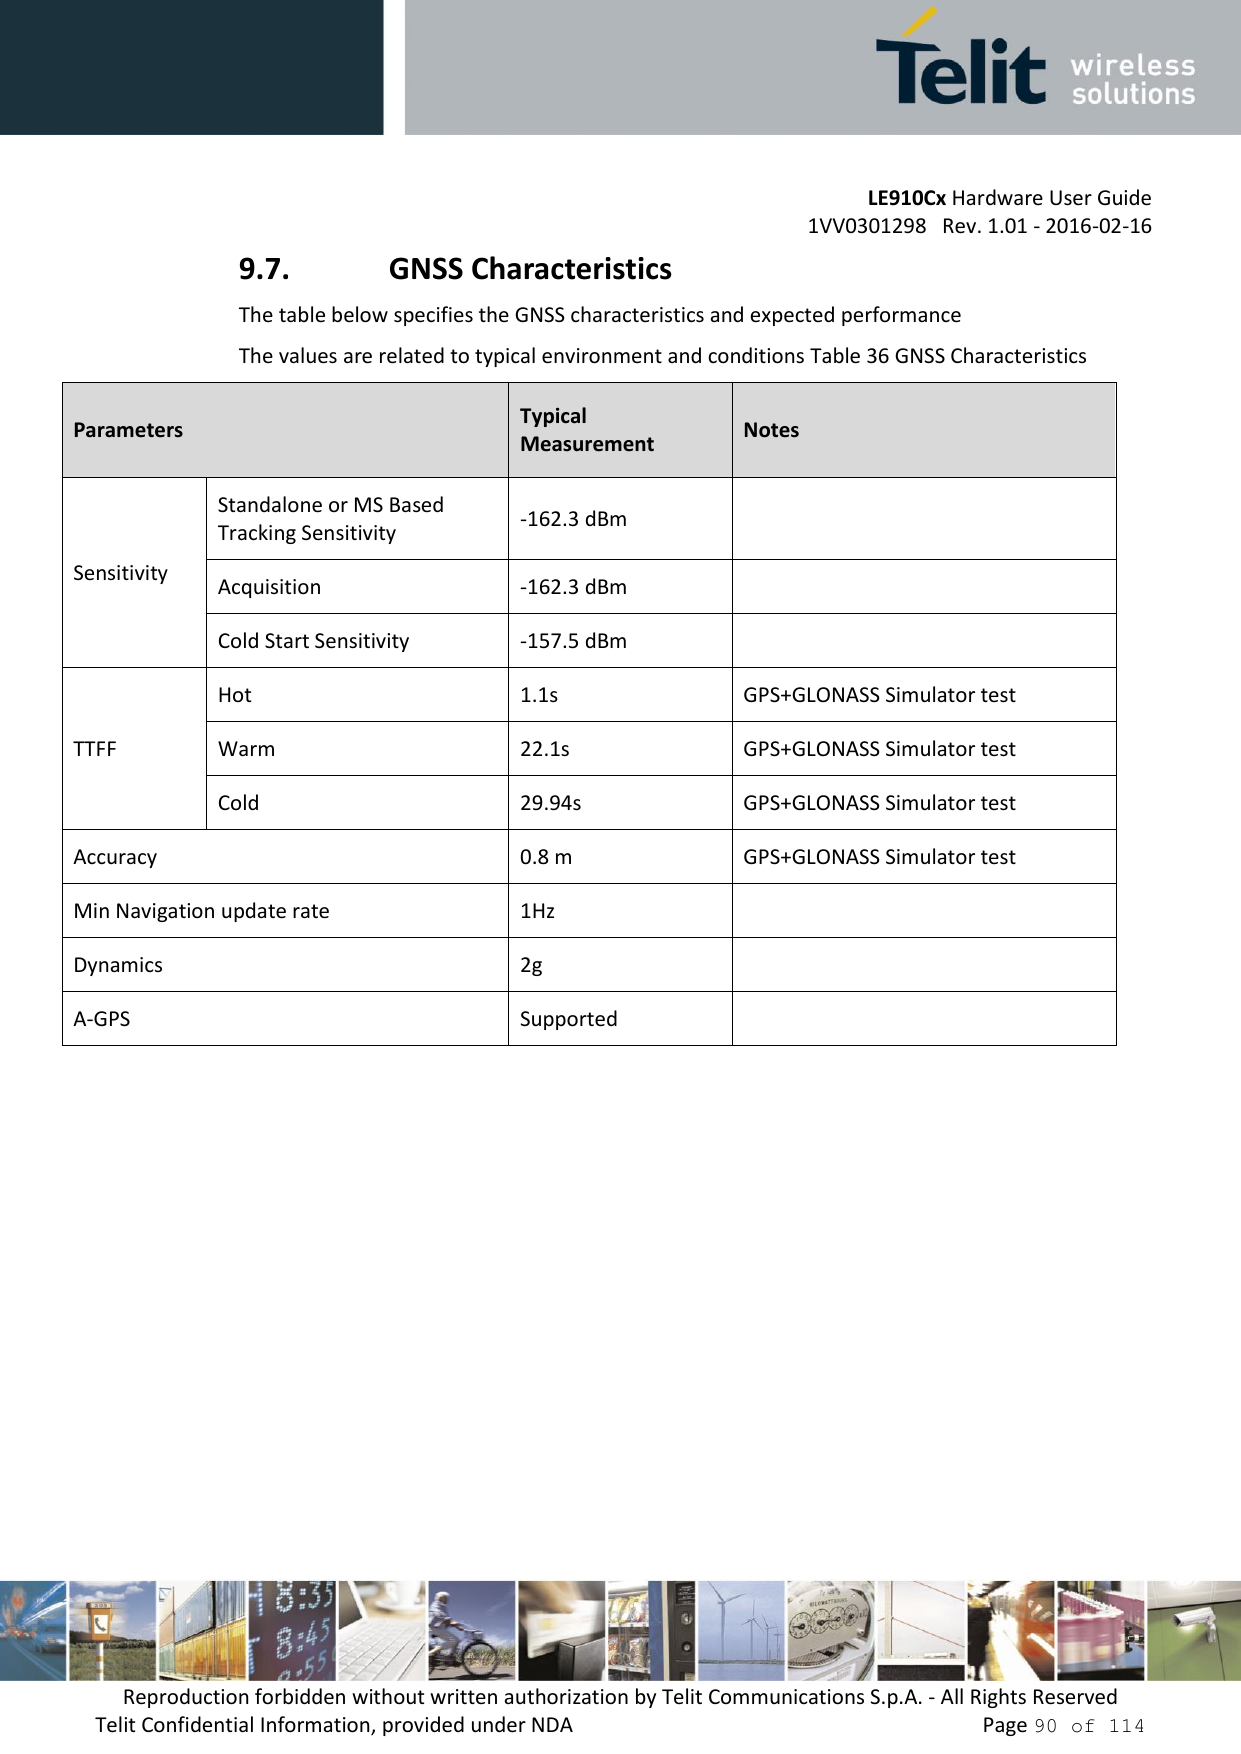         LE910Cx Hardware User Guide     1VV0301298   Rev. 1.01 - 2016-02-16 Reproduction forbidden without written authorization by Telit Communications S.p.A. - All Rights Reserved Telit Confidential Information, provided under NDA                 Page 90 of 114 9.7. GNSS Characteristics The table below specifies the GNSS characteristics and expected performance  The values are related to typical environment and conditions Table 36 GNSS Characteristics Parameters Typical Measurement Notes Sensitivity Standalone or MS Based Tracking Sensitivity -162.3 dBm   Acquisition  -162.3 dBm   Cold Start Sensitivity -157.5 dBm   TTFF Hot 1.1s GPS+GLONASS Simulator test Warm 22.1s GPS+GLONASS Simulator test Cold 29.94s GPS+GLONASS Simulator test Accuracy  0.8 m GPS+GLONASS Simulator test Min Navigation update rate  1Hz   Dynamics  2g   A-GPS  Supported    